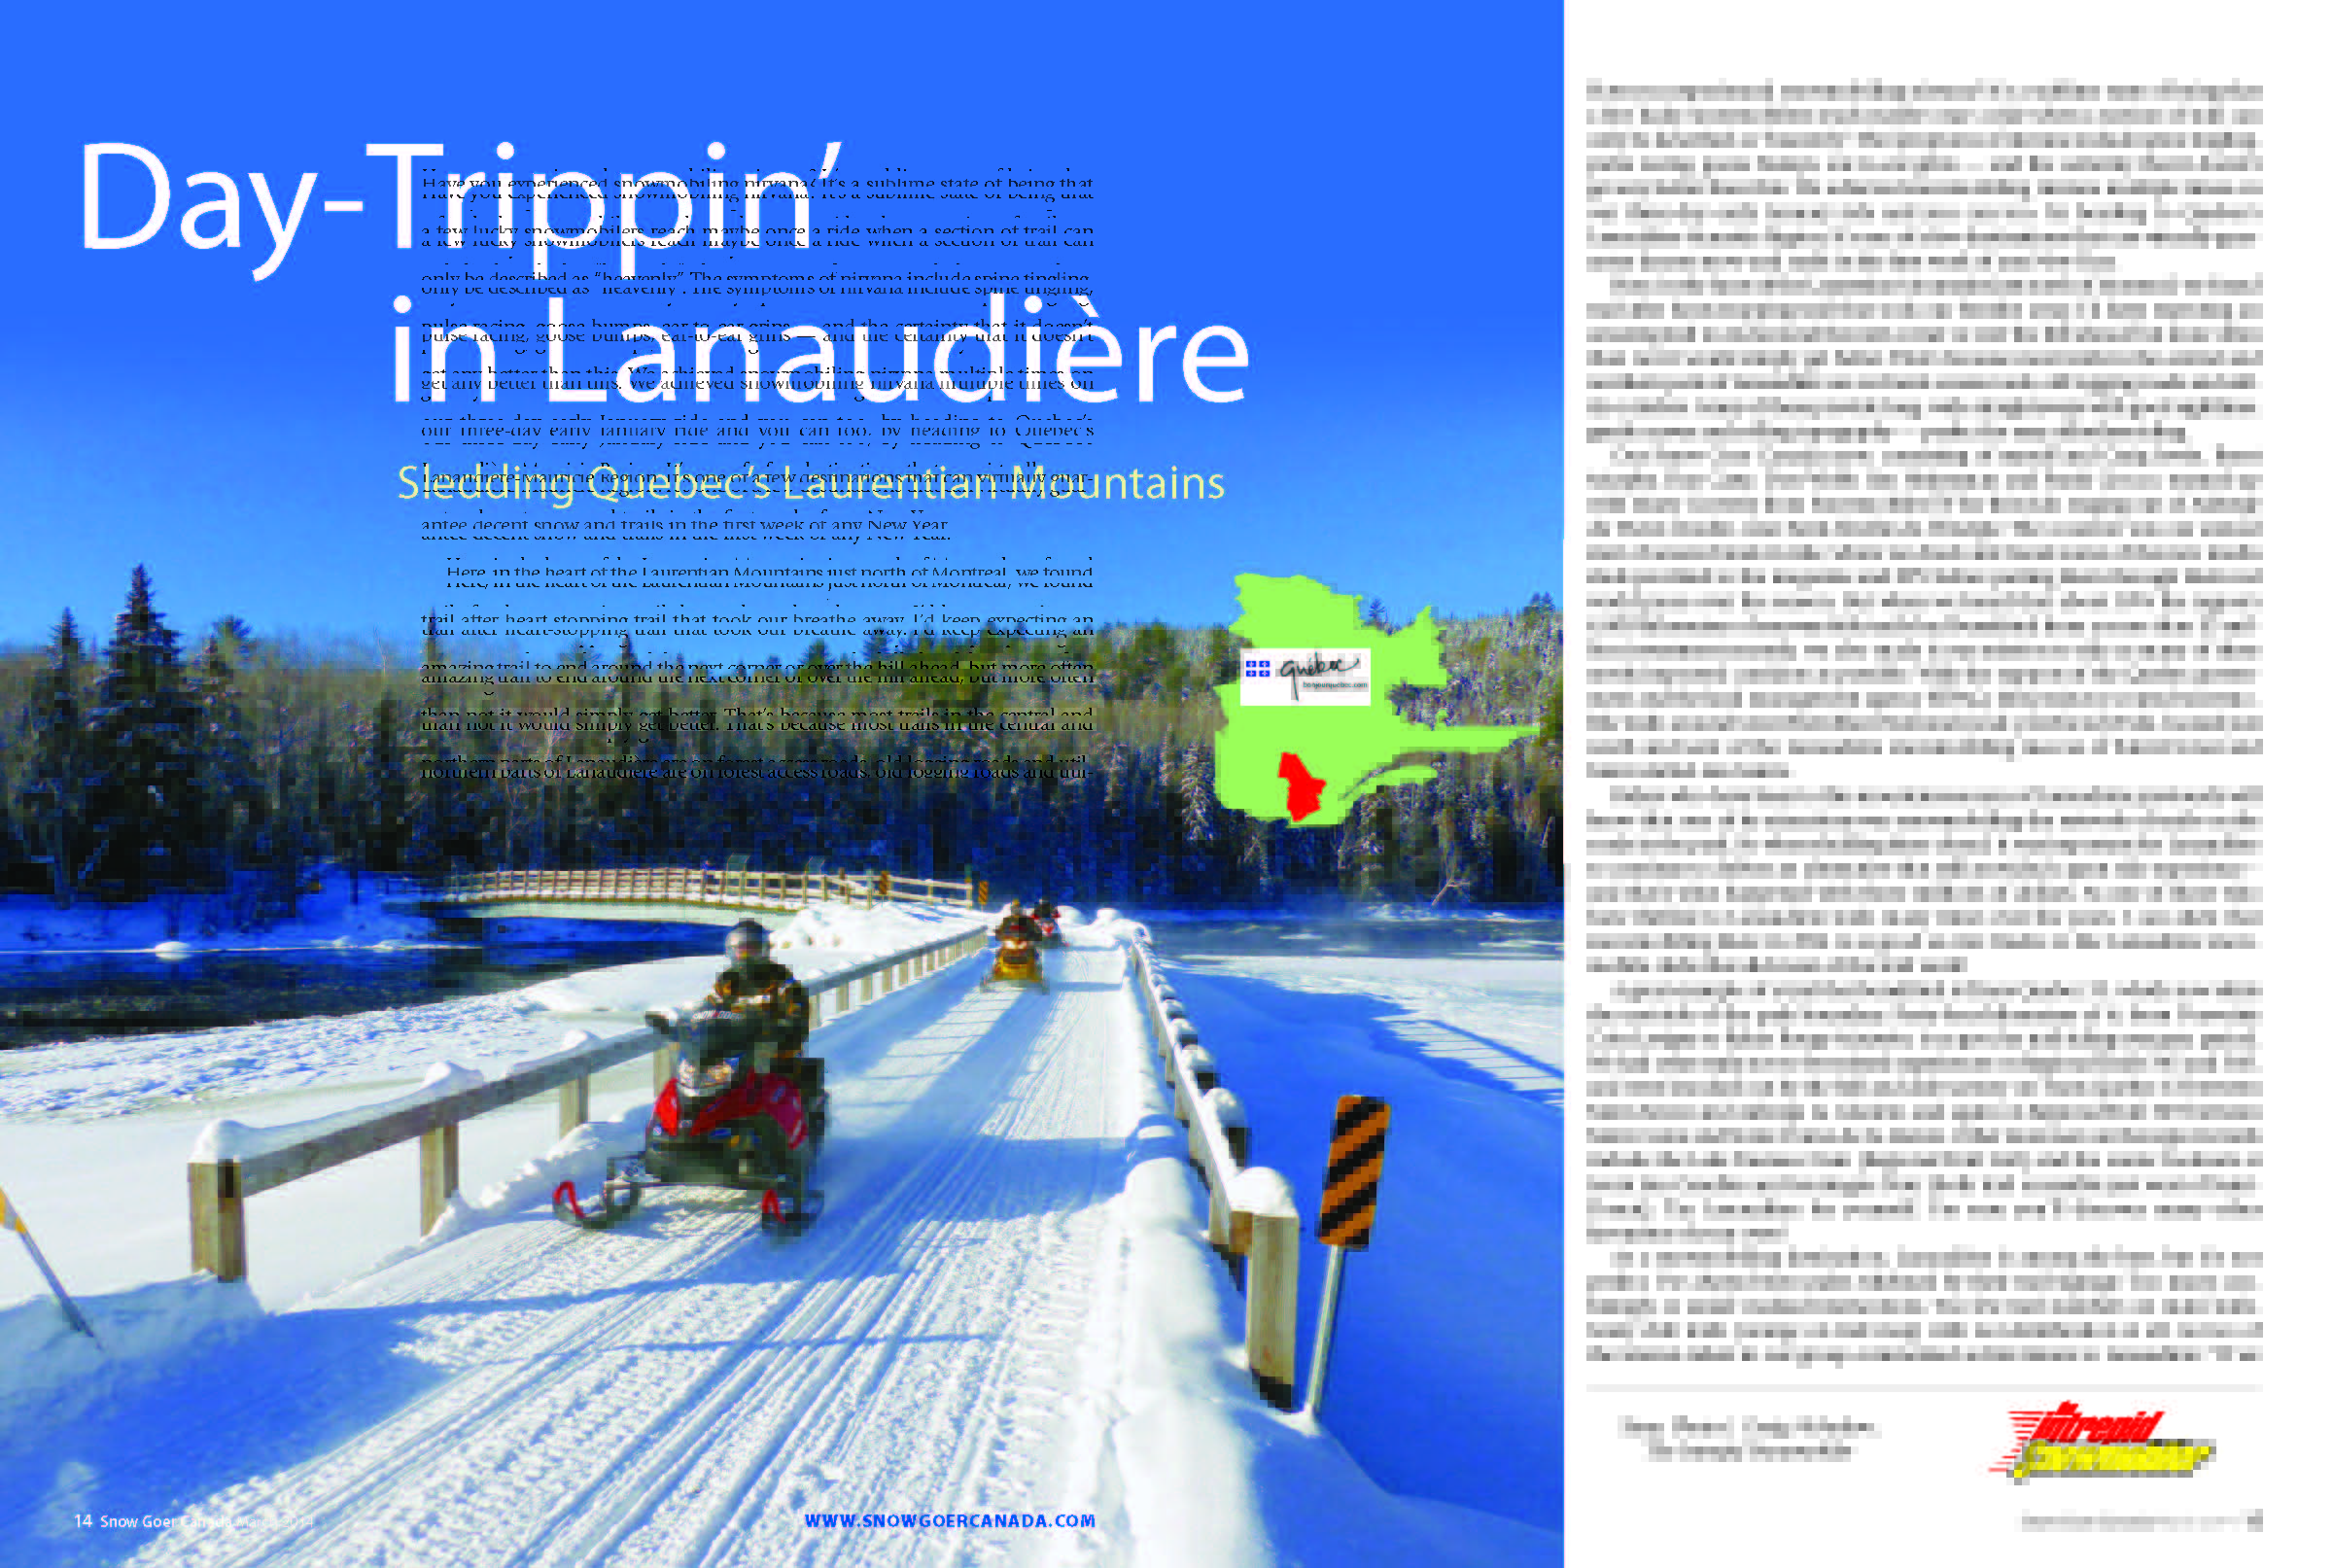 snowmobile lanaudiere Crossing bridge while Day-Trippin' in Lanaudiere